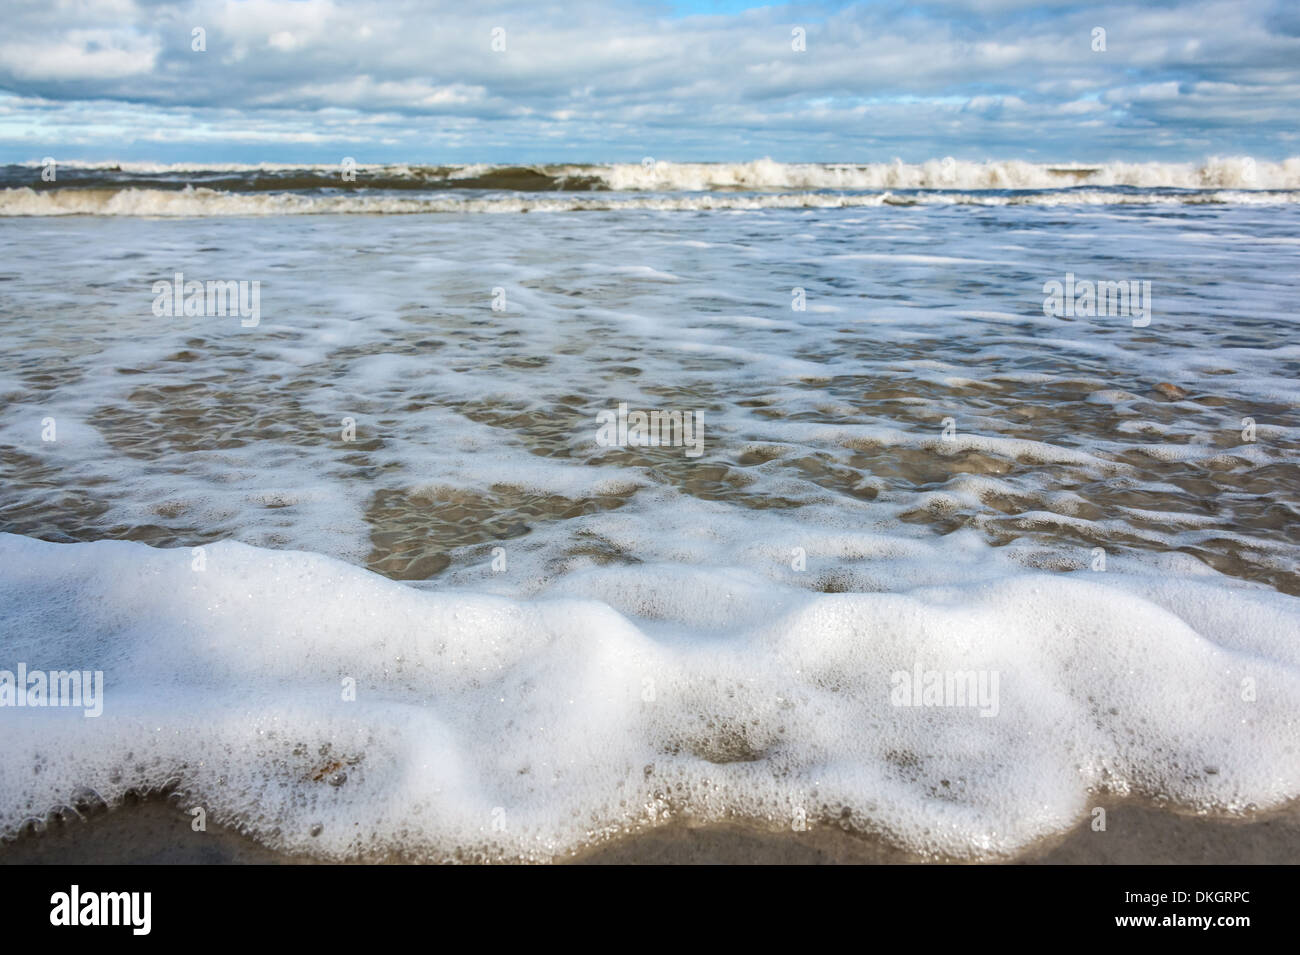 Ocean waves spread thin, foam-laced sheets of water across the sandy shoreline of Jacksonville Beach, Florida. (USA) Stock Photo